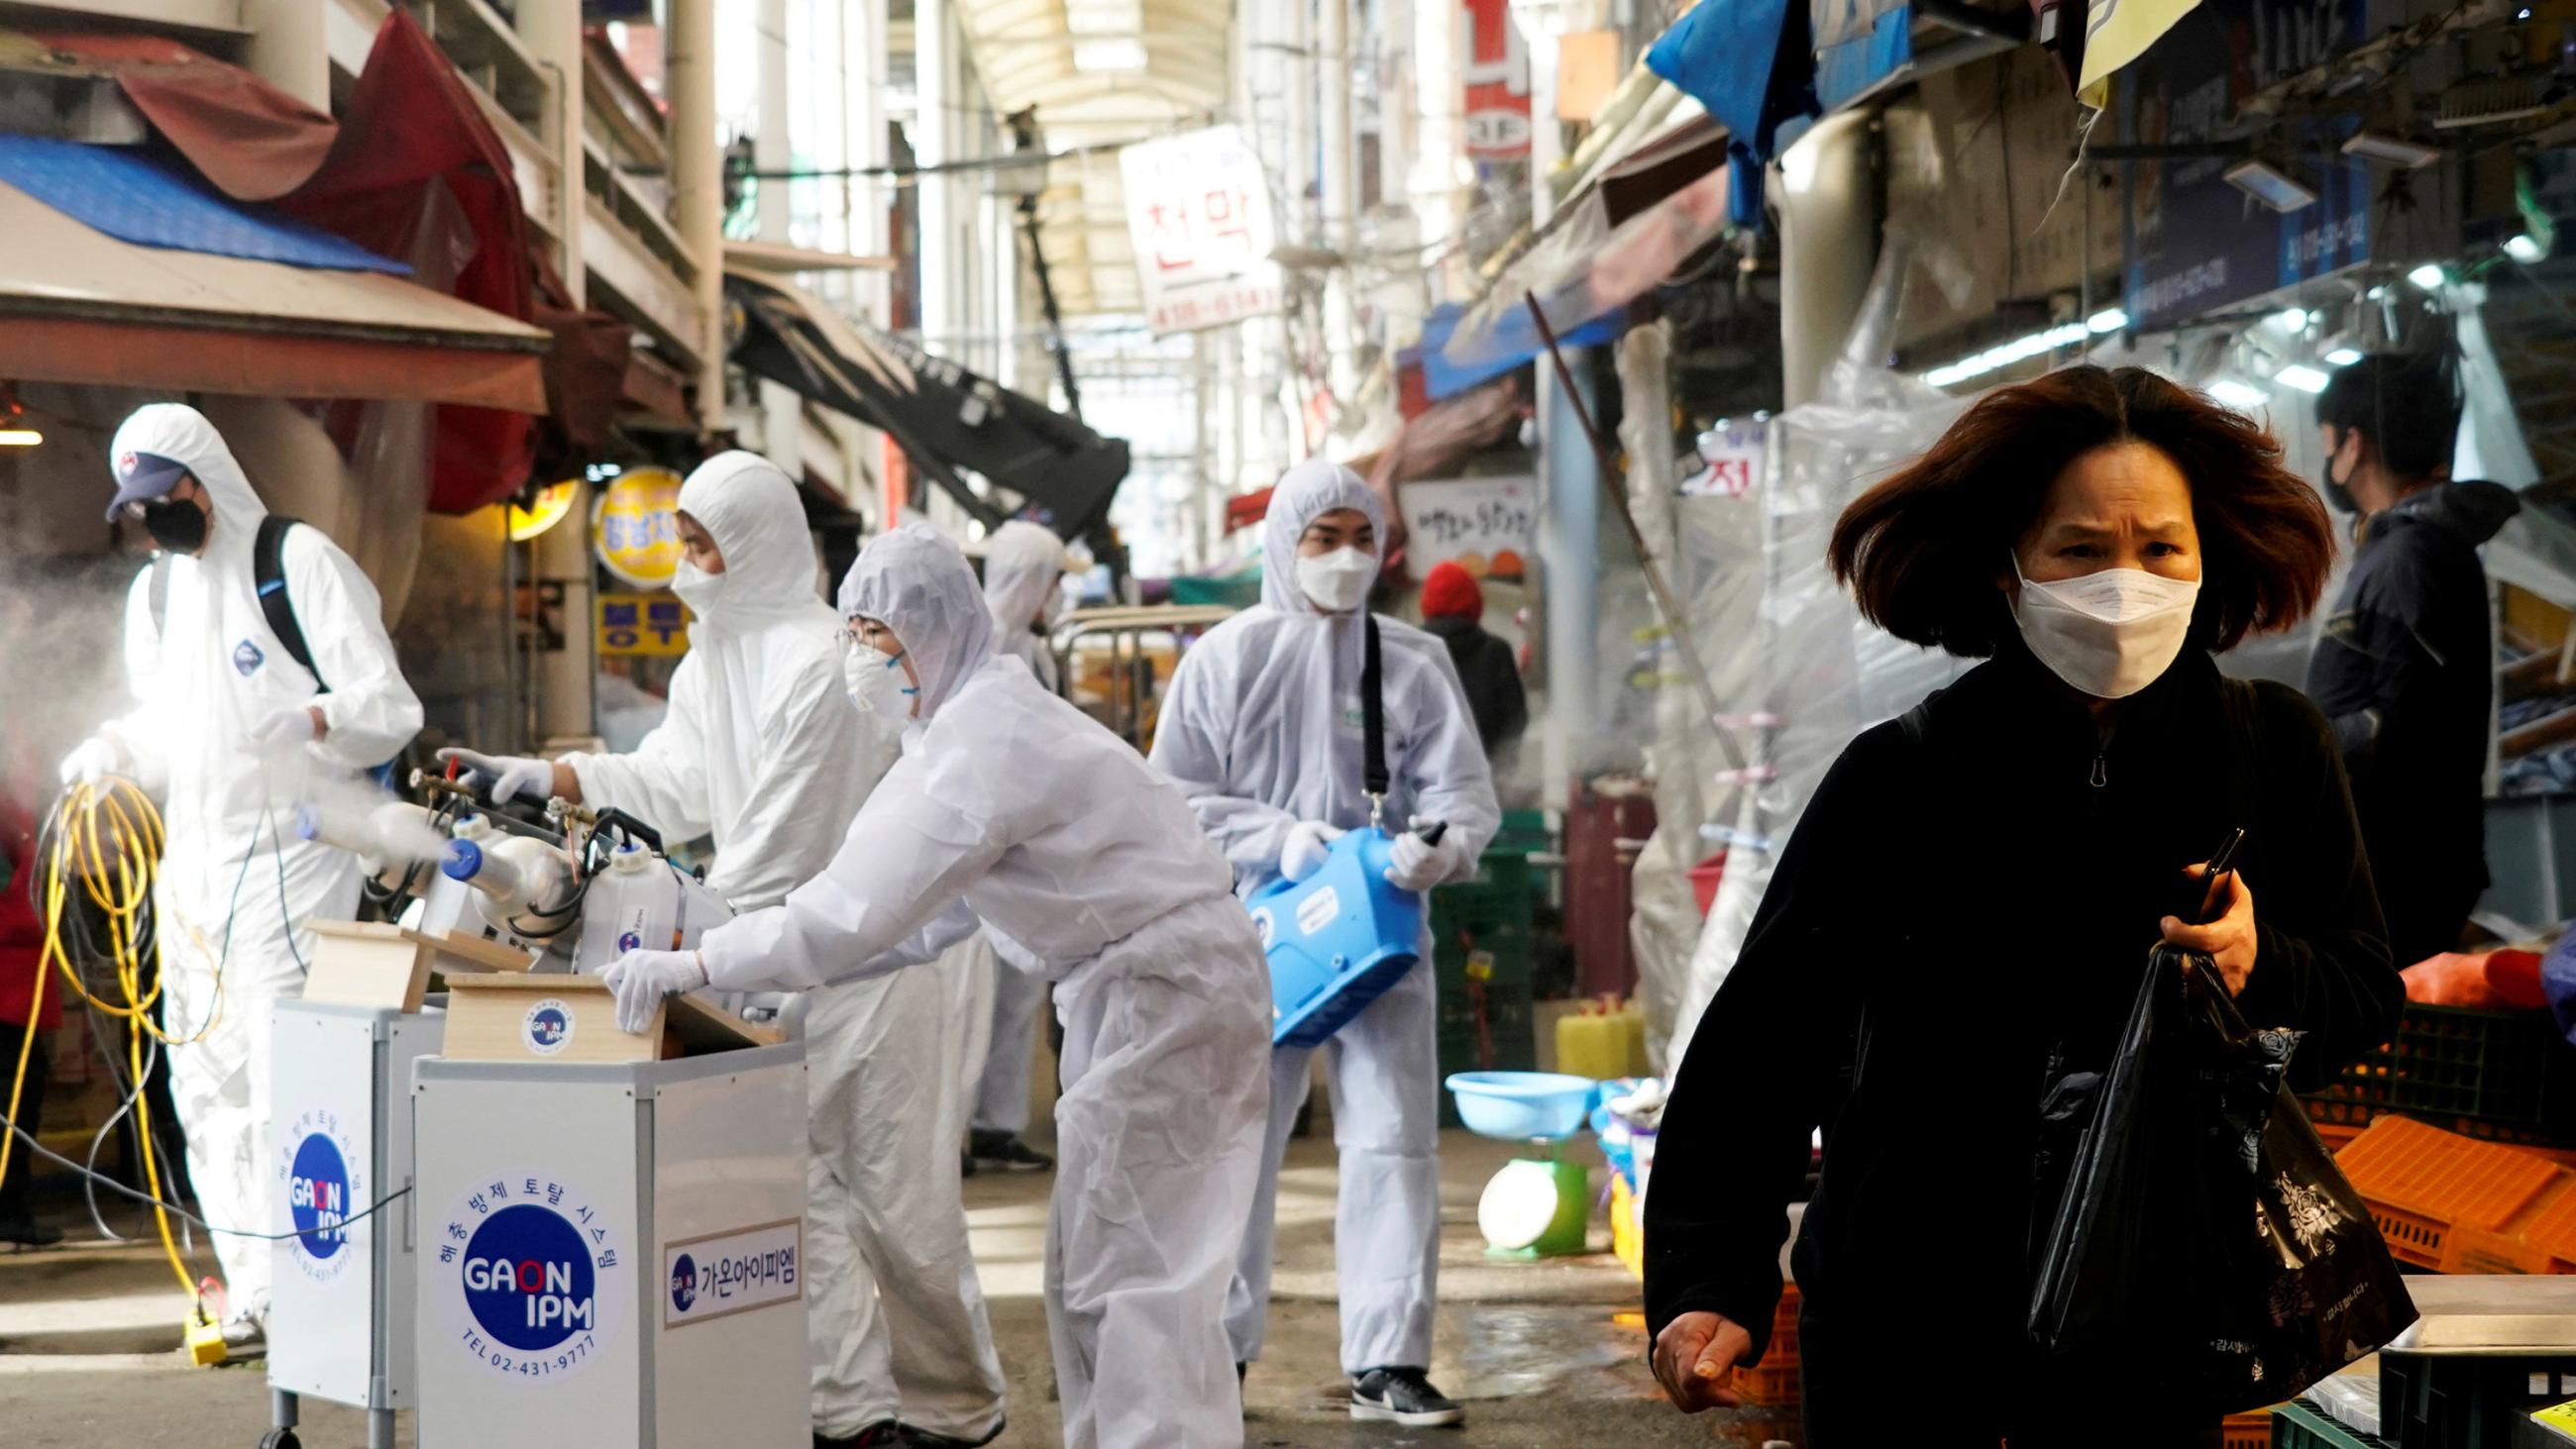 Image shows a woman walking through a crowded marketplace as a work crew teams up on an industrial sanitation machine. The look on her face suggests fear. 